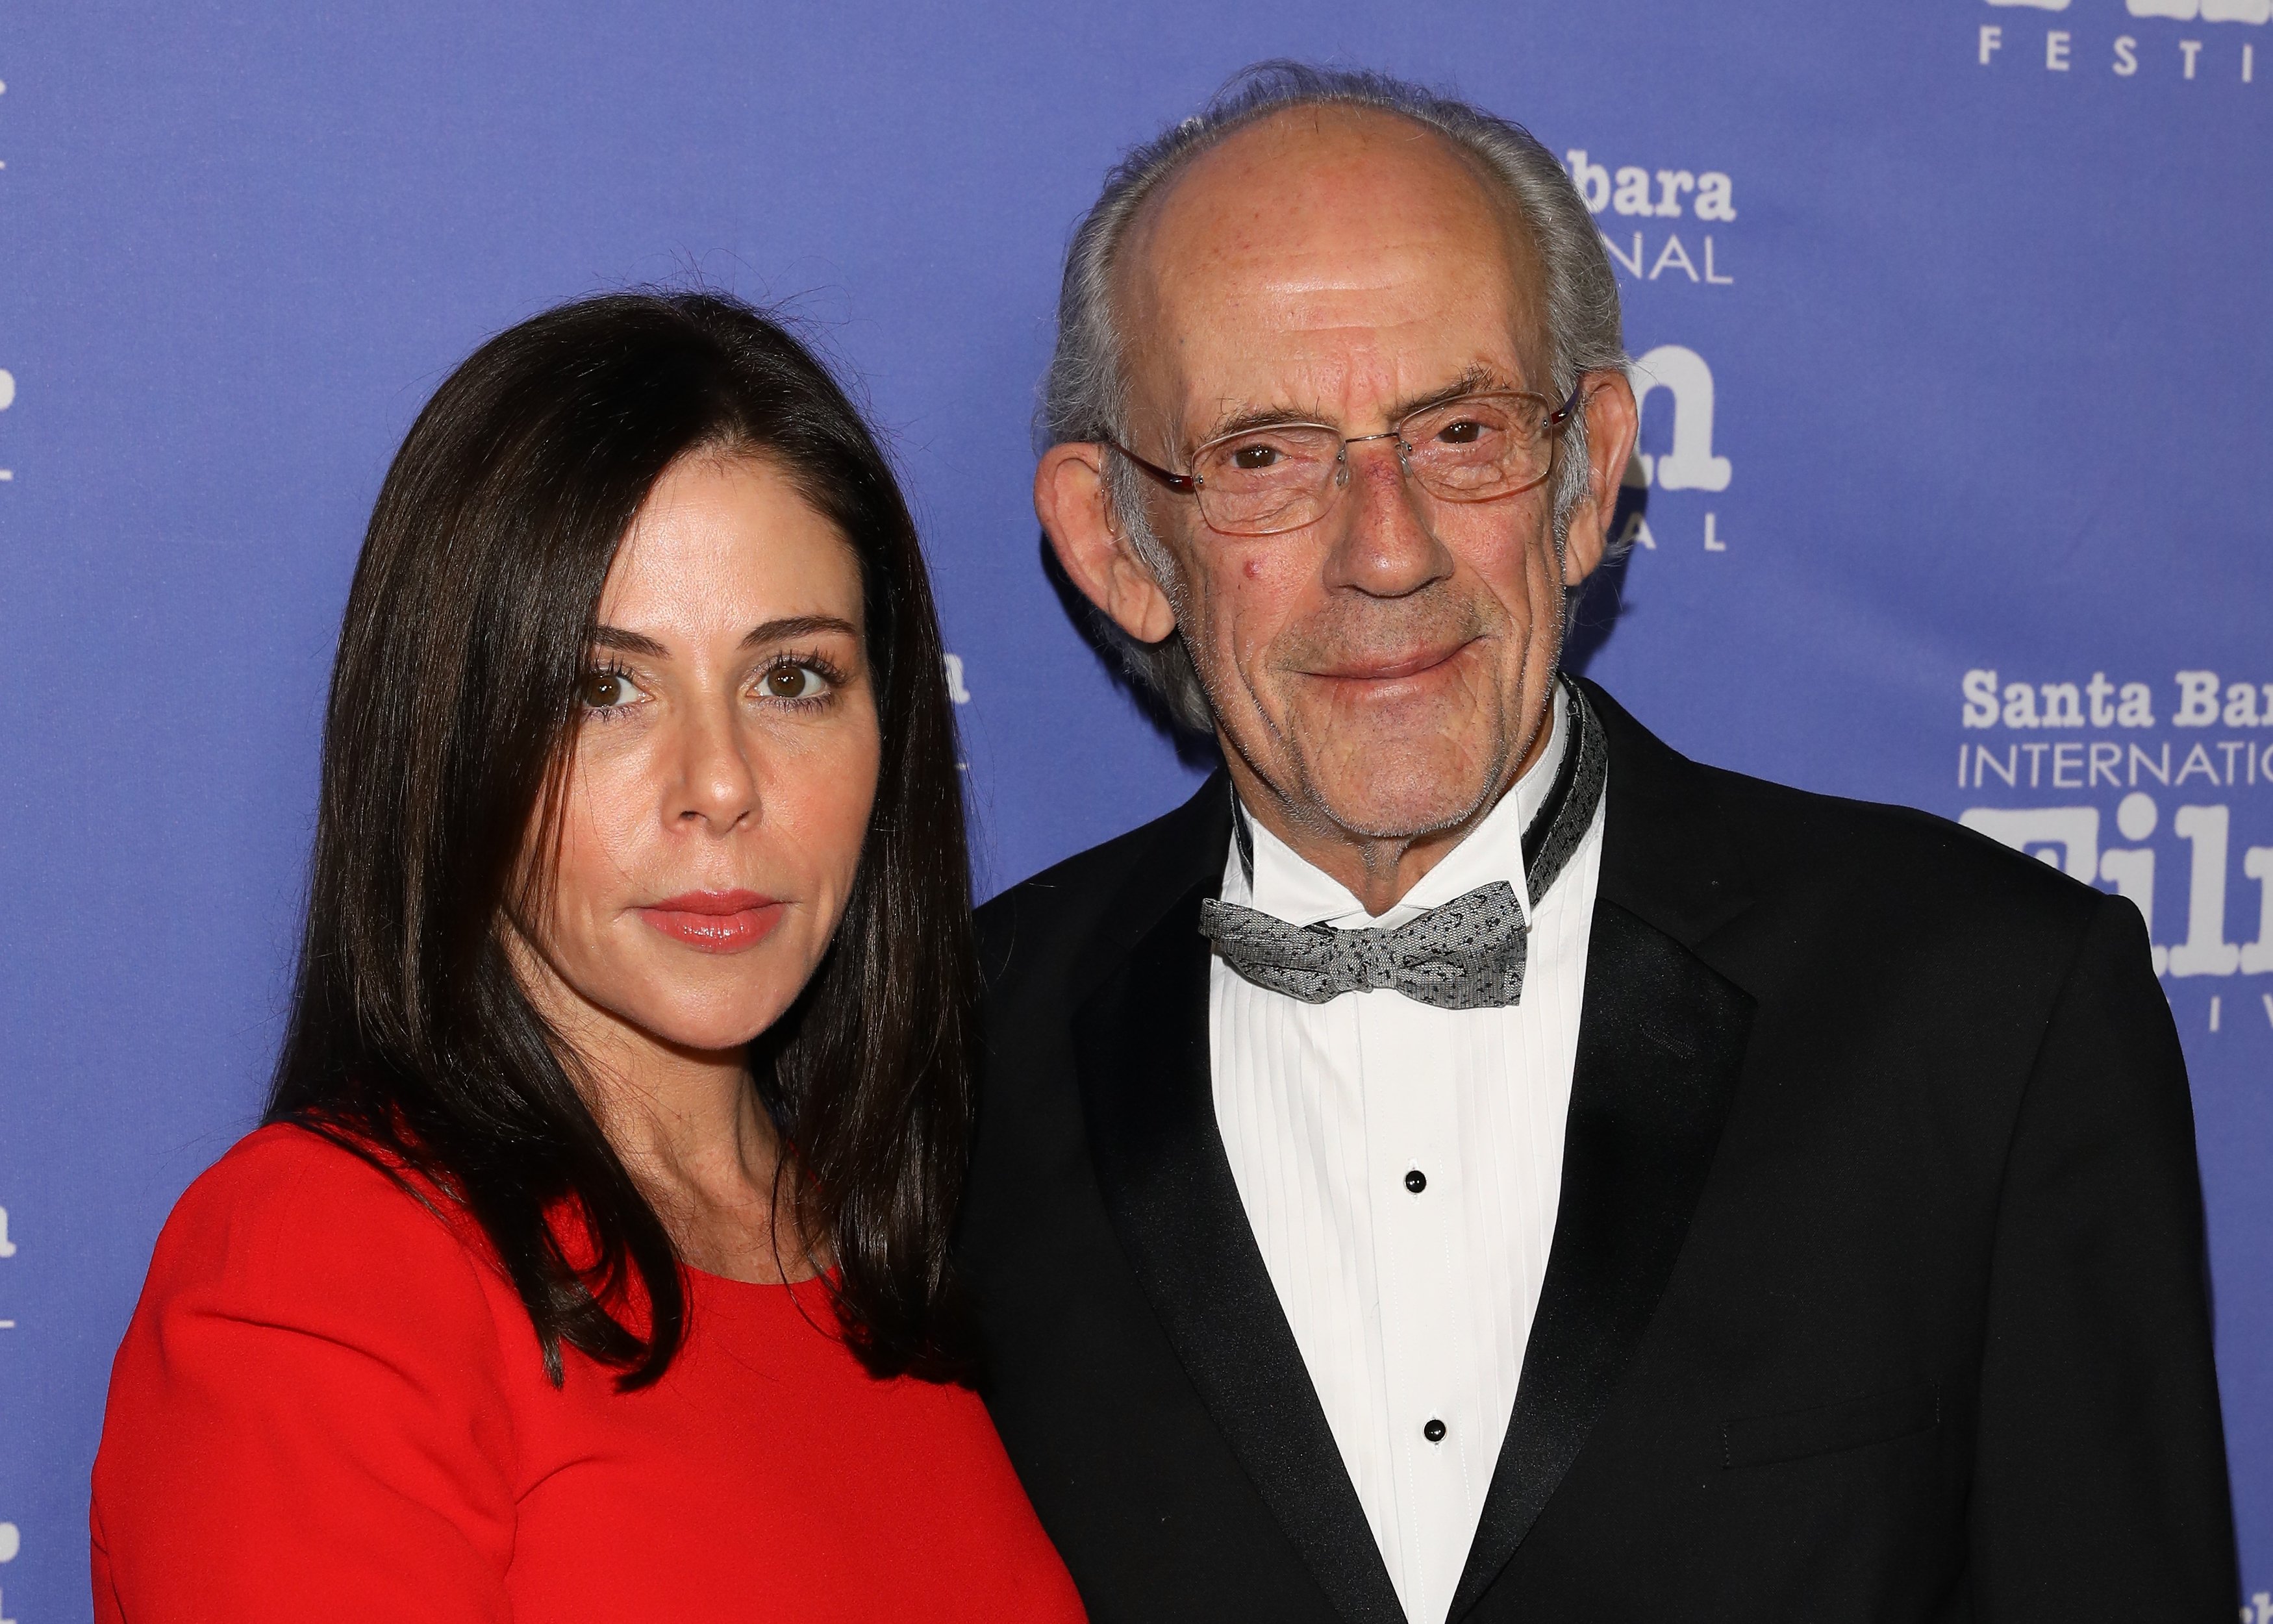 Jane Walker Wood and Christopher Lloyd at the 13th Annual Santa Barbara International Film Festival Honors Hugh Jackman with Kirk Douglas Award For Excellence in Film on November 19, 2018, in Santa Barbara, California. | Source: Getty Images